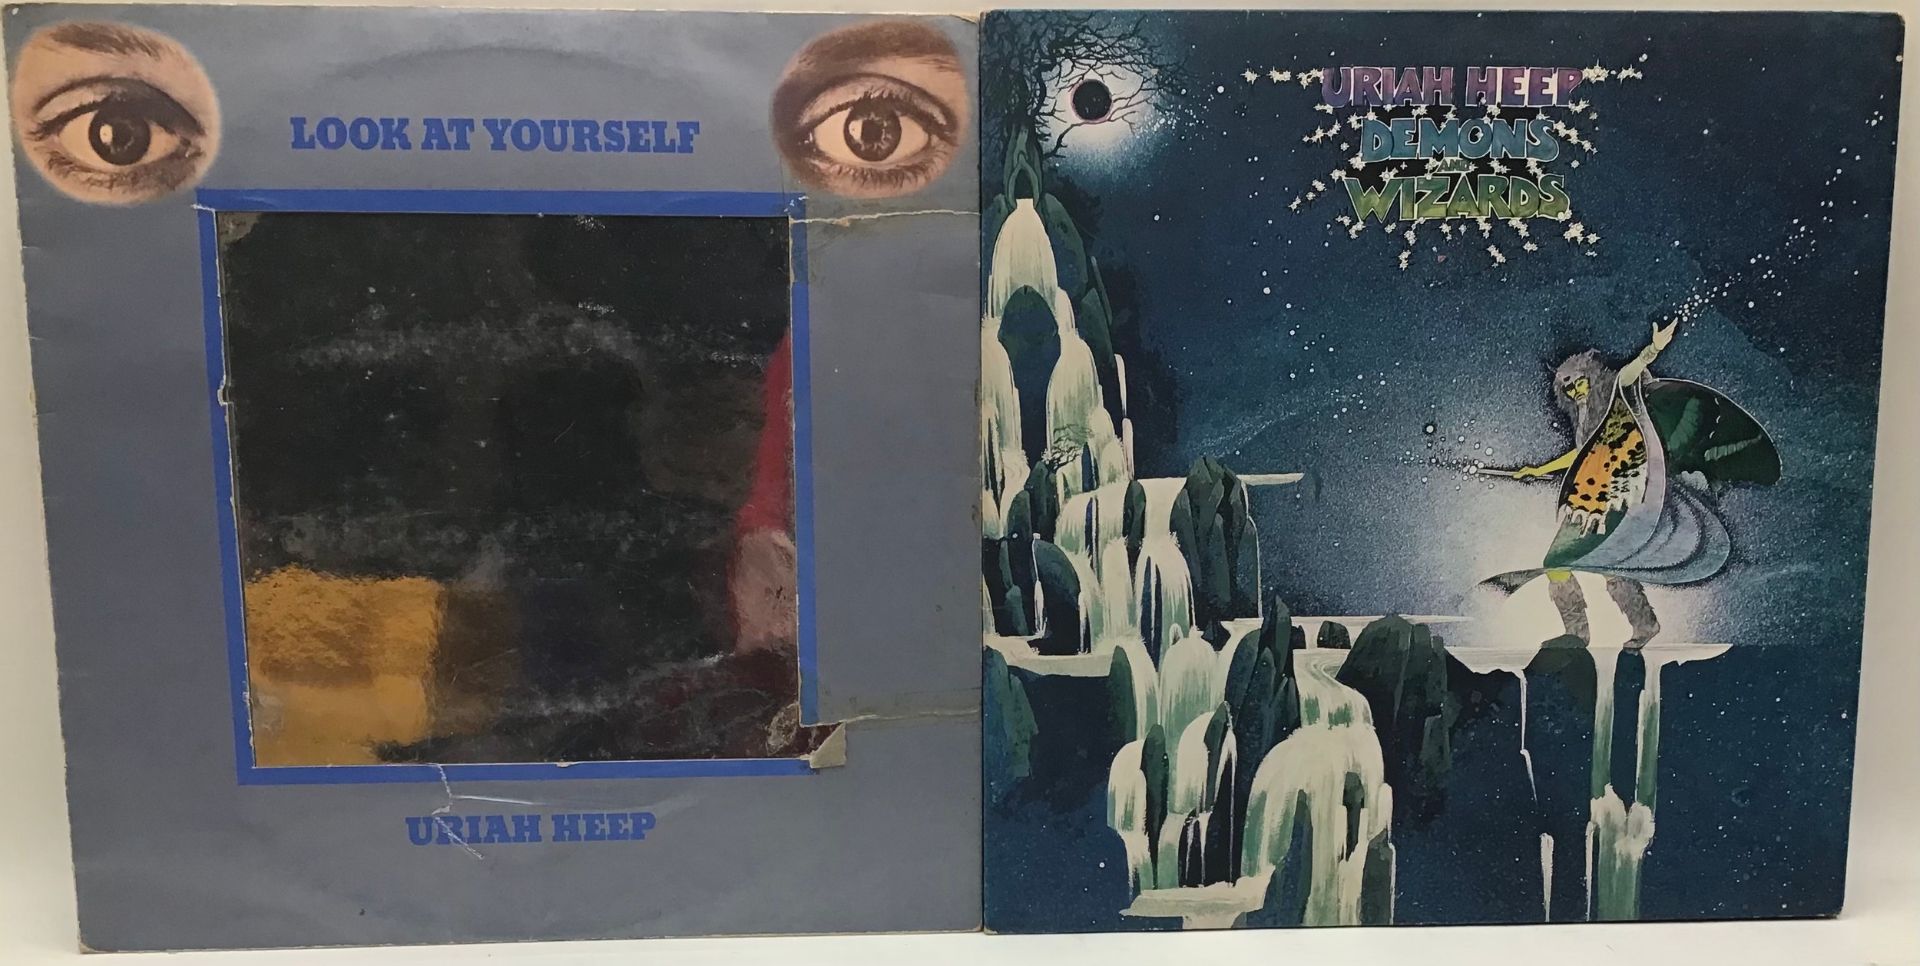 URIAH HEEP X 2 VINYL RECORDS. Nice couple of albums here with 'Look At Yourself' on Bronze ILPS 9169